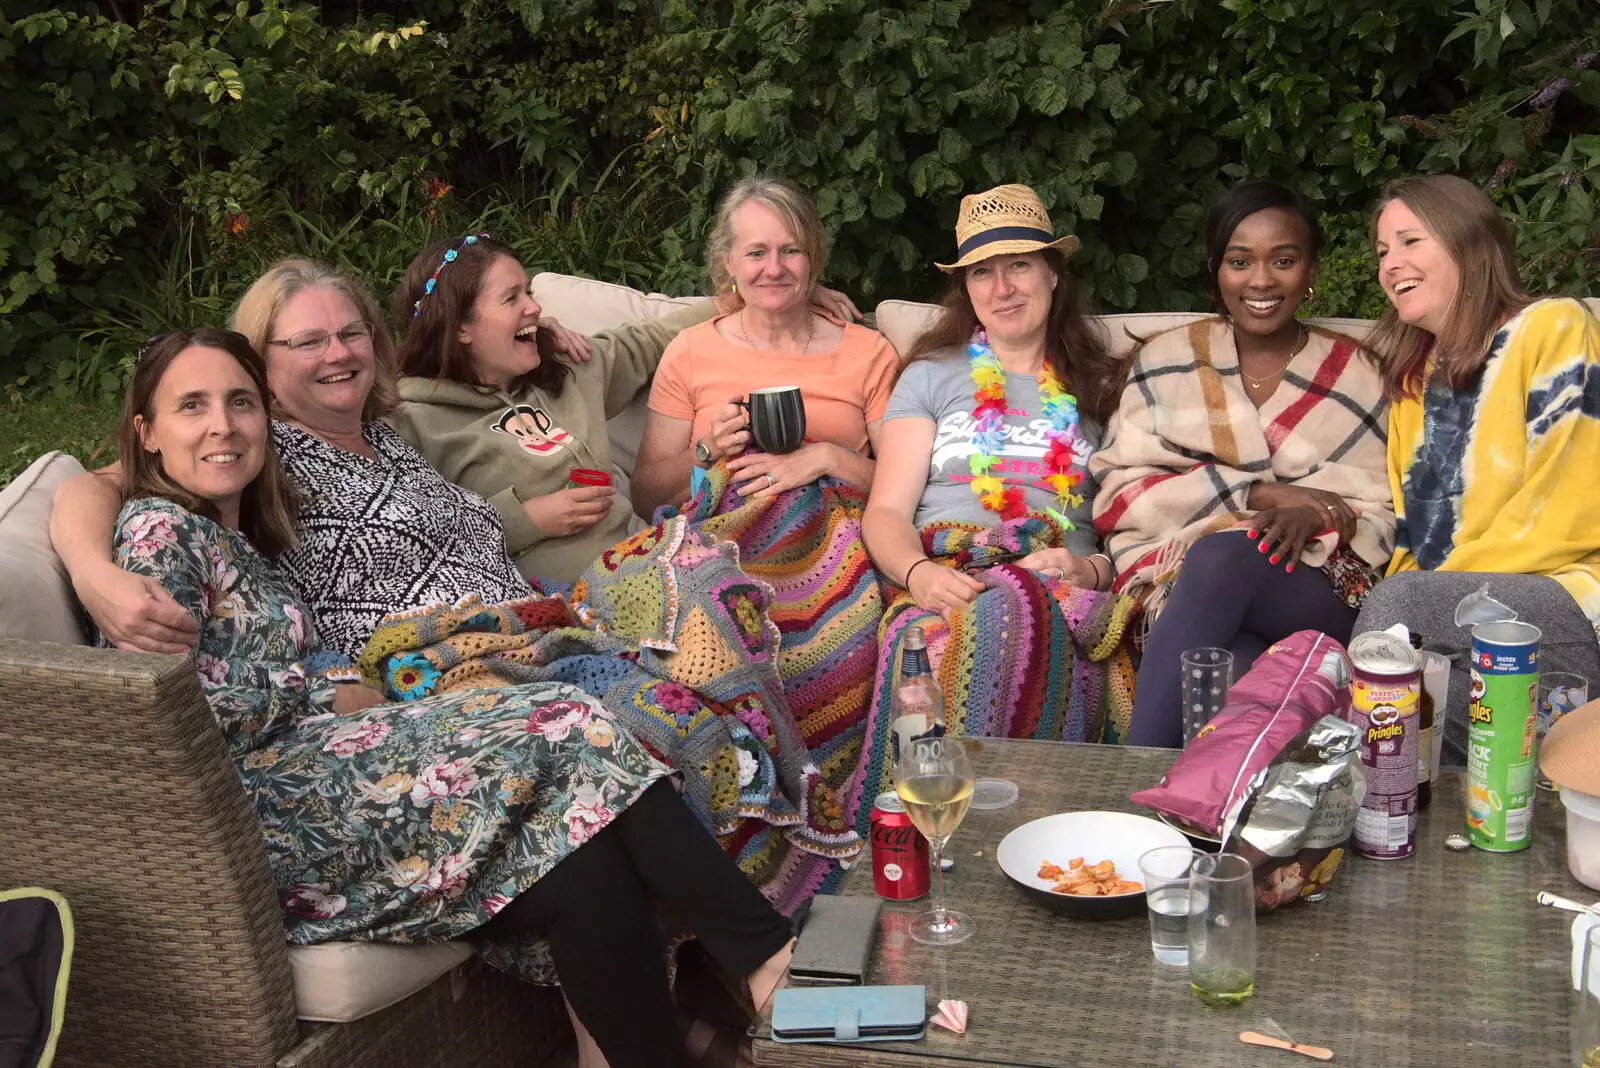 A group photo of the girls, from Meg-fest, and Sean Visits, Bressingham and Brome, Suffolk - 1st August 2021